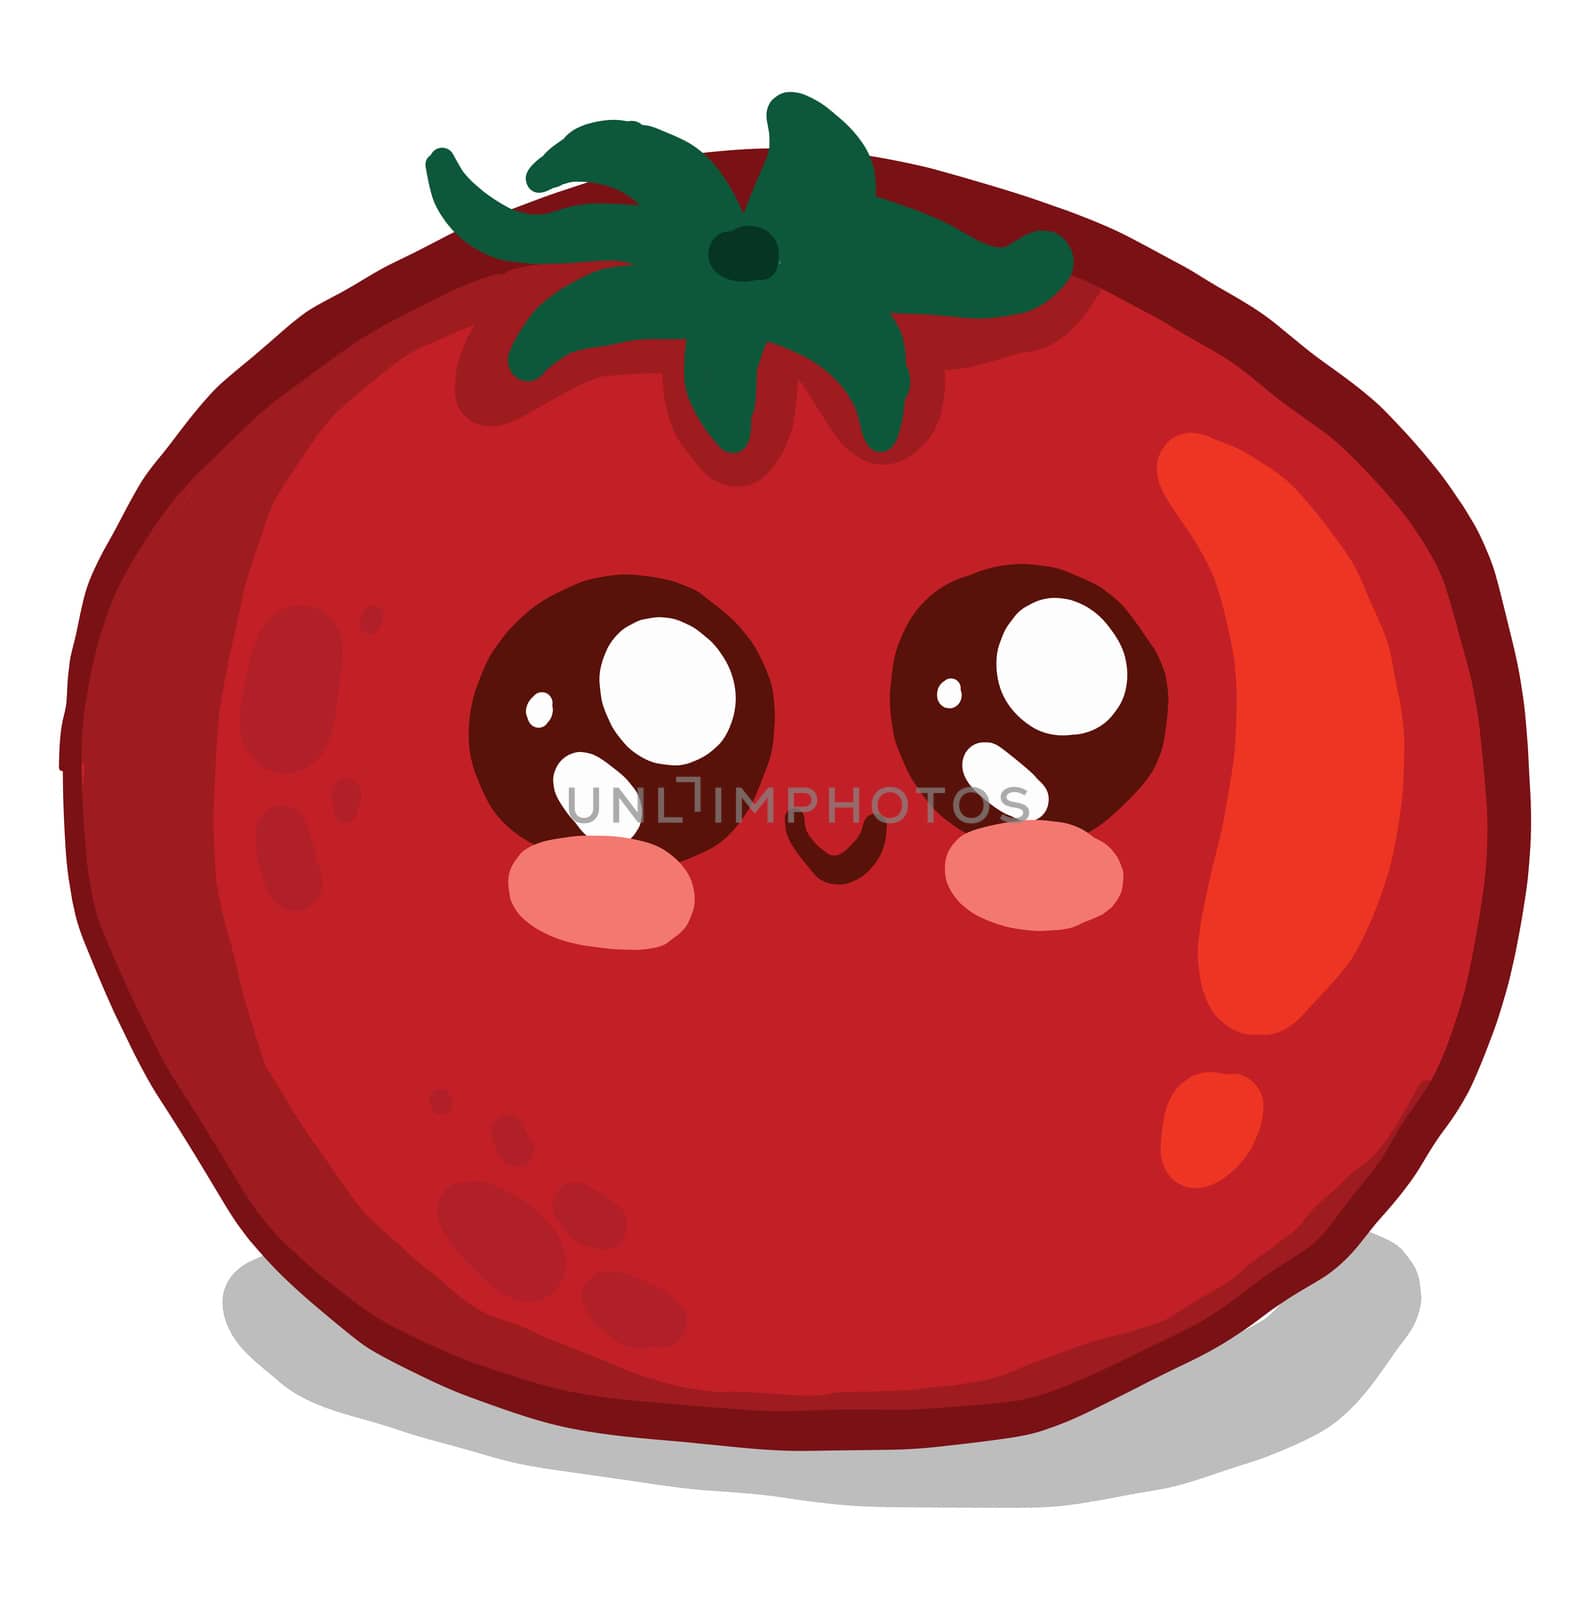 Cute red tomato , illustration, vector on white background